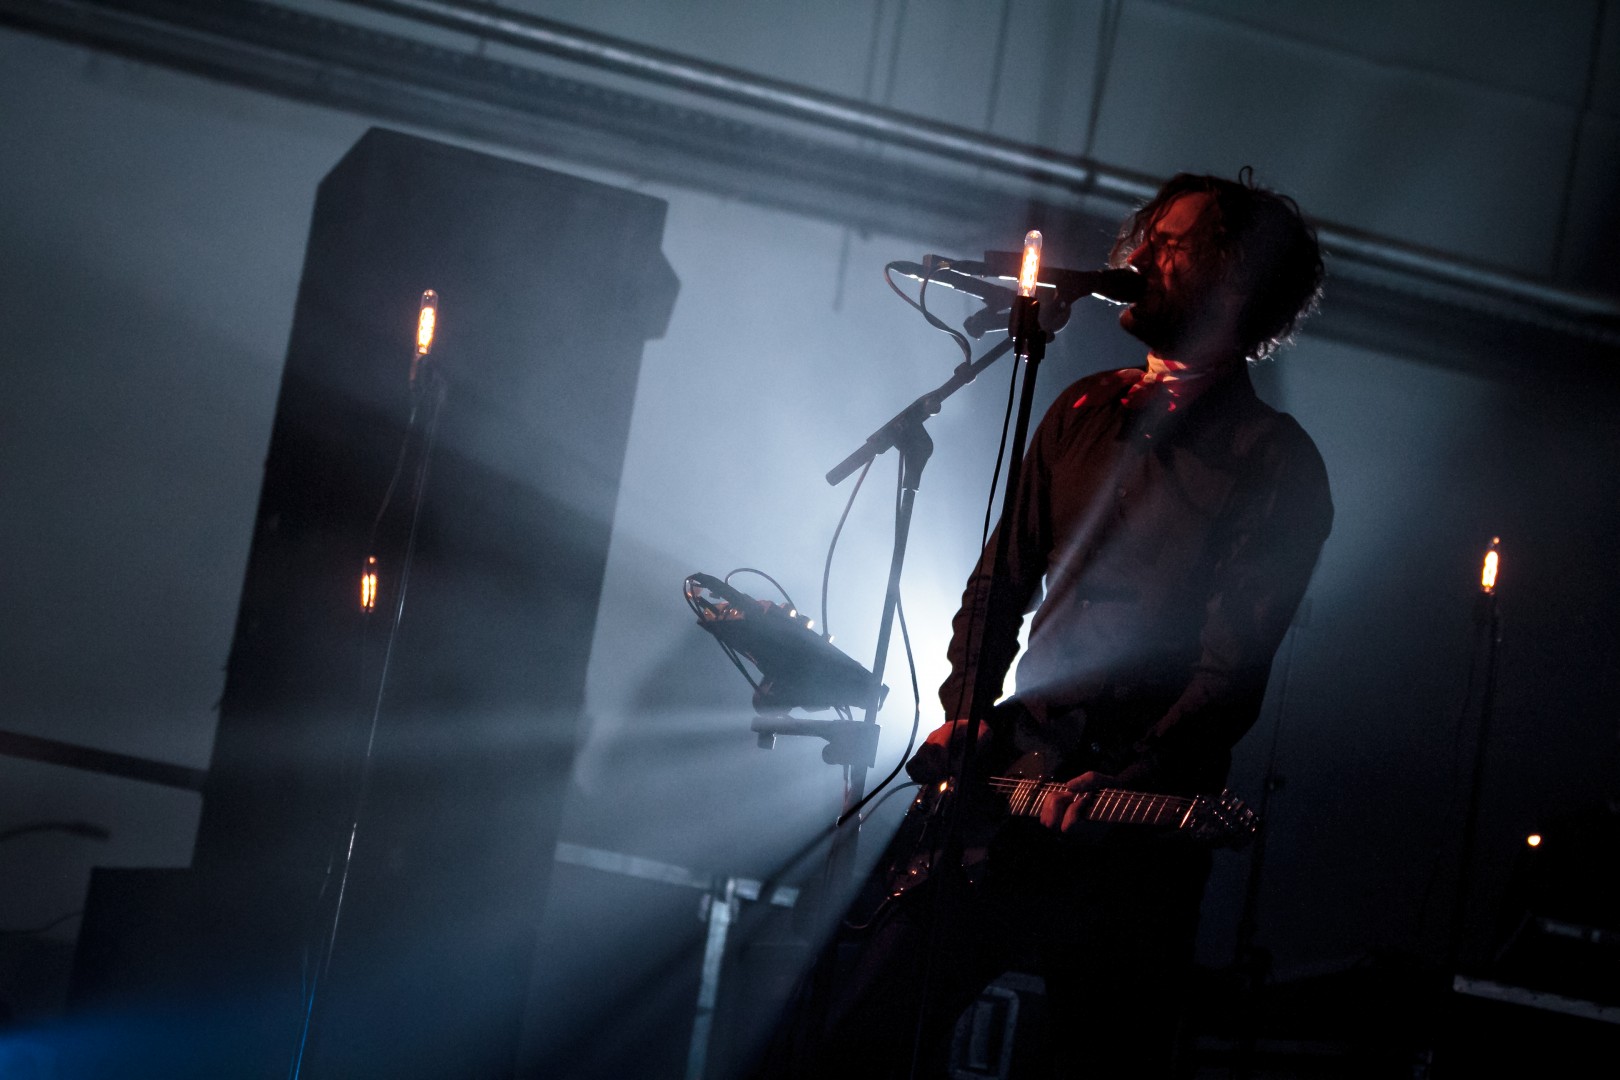 Apparat at Turbohalle in Bucharest on April 8, 2012 (dc0f95de8e)